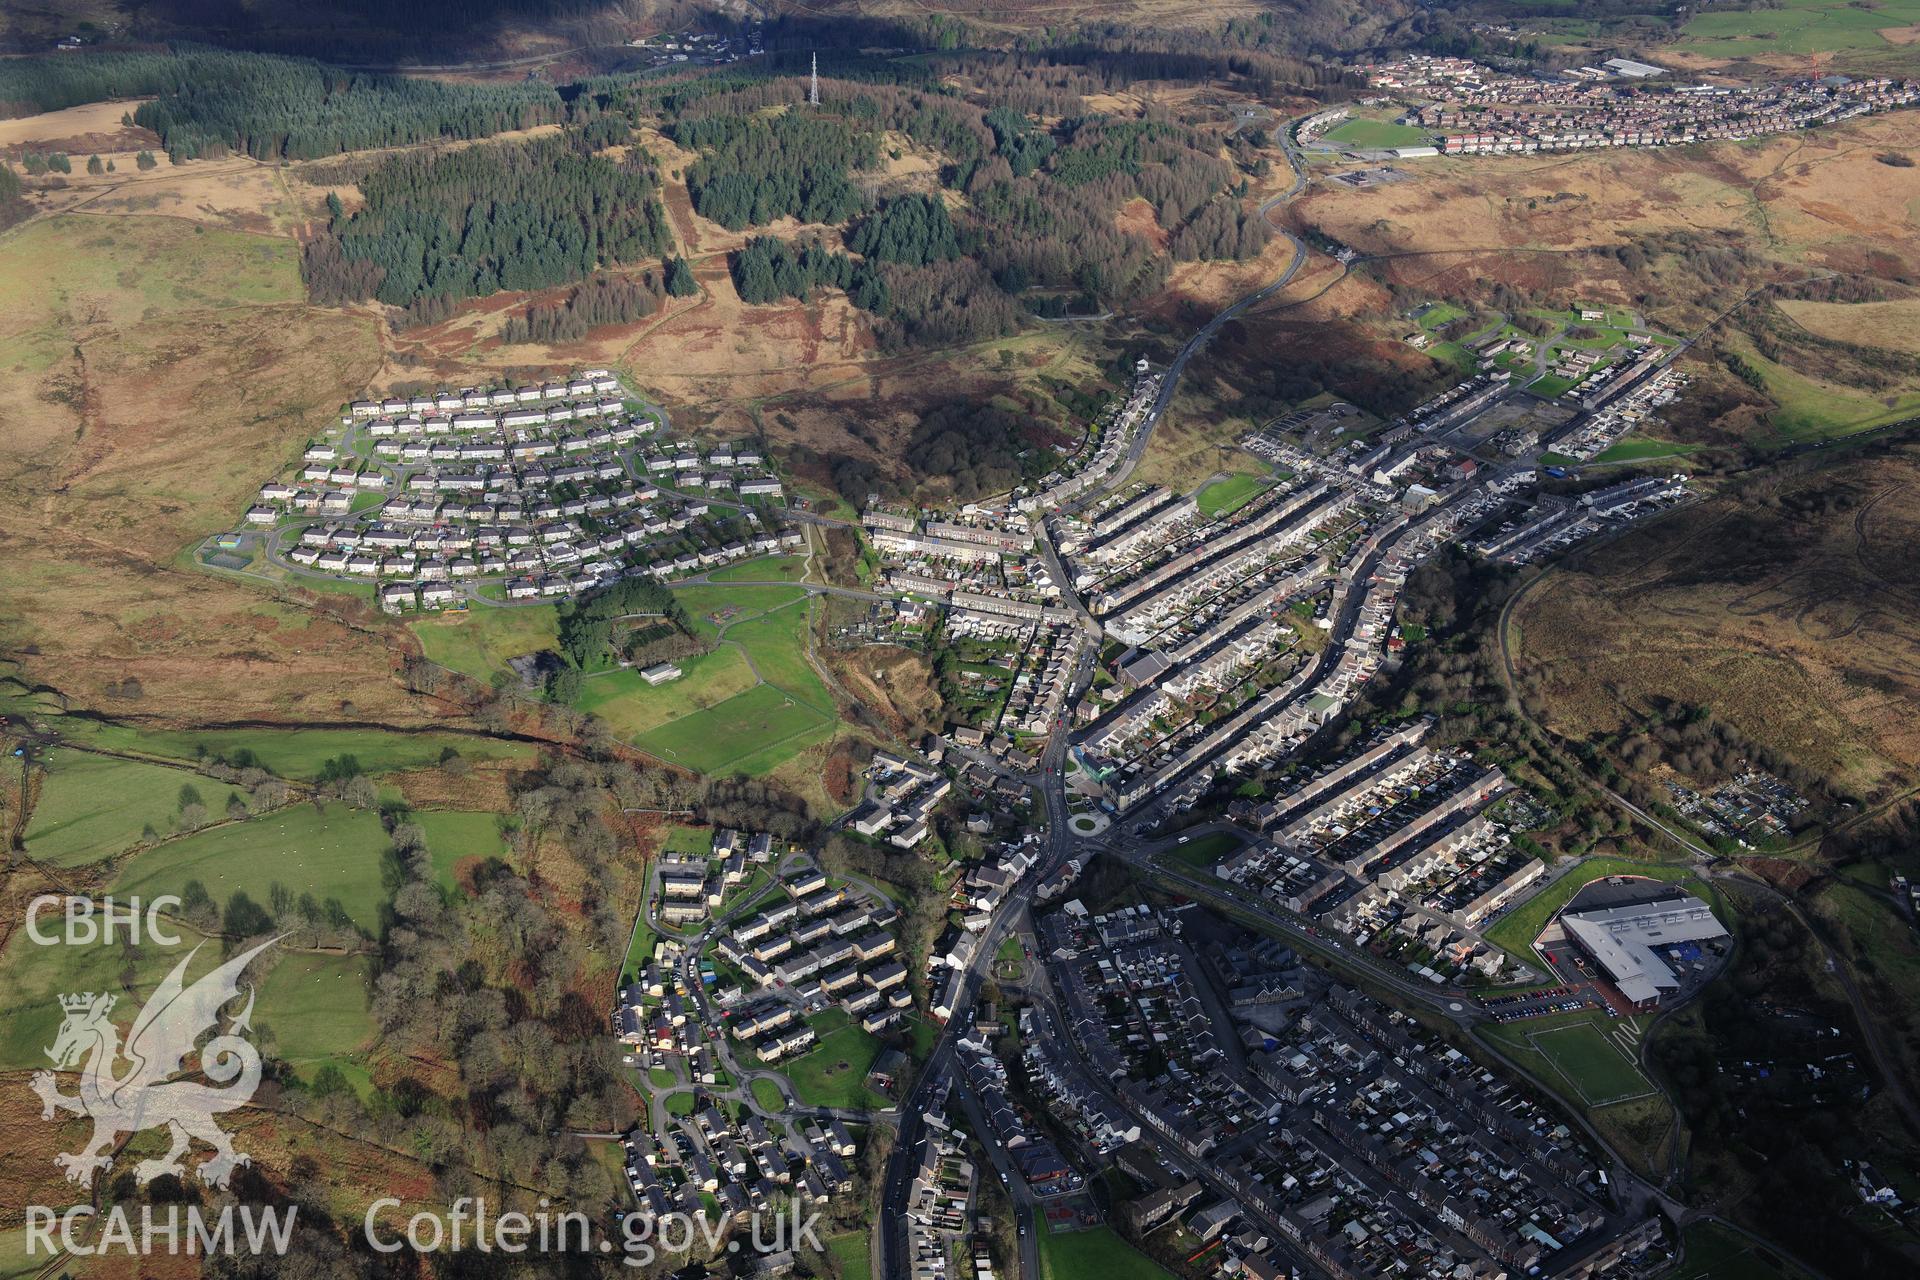 RCAHMW colour oblique photograph of Caerau, Dyffryn, view from south-west. Taken by Toby Driver on 28/11/2012.